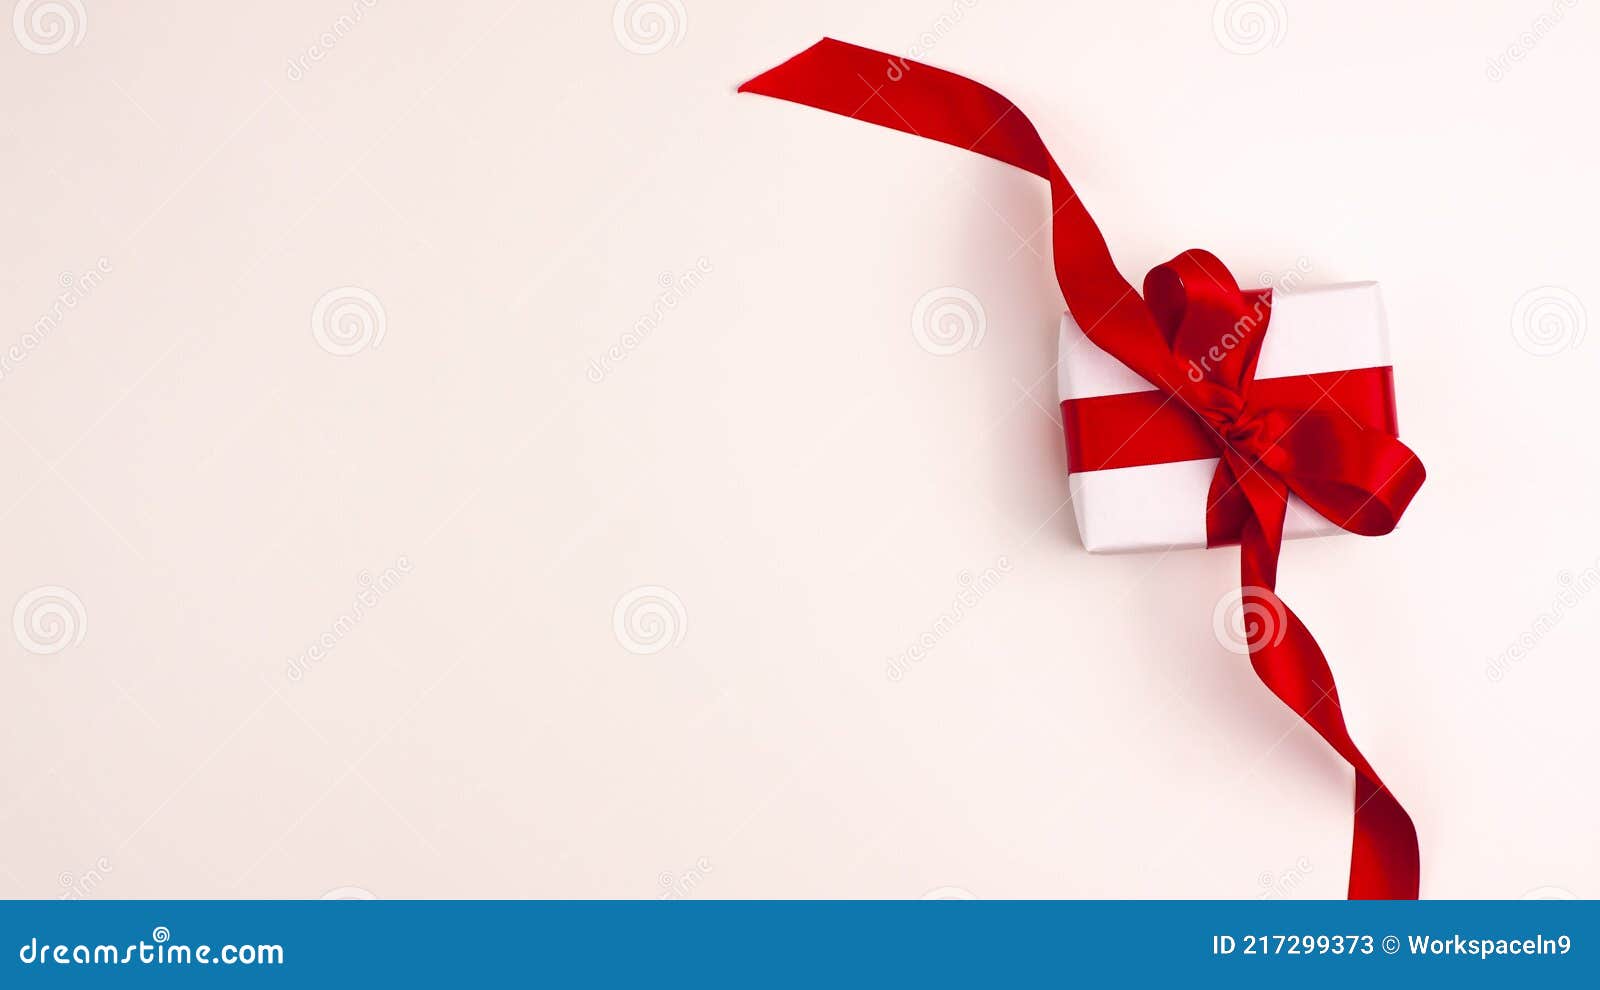 Stop Motion Animation of Template Flat Lay of White Gift Box with a Red Satin Ribbon on the Right White Background. Mothers Stock Video Video of space, view: 217299373